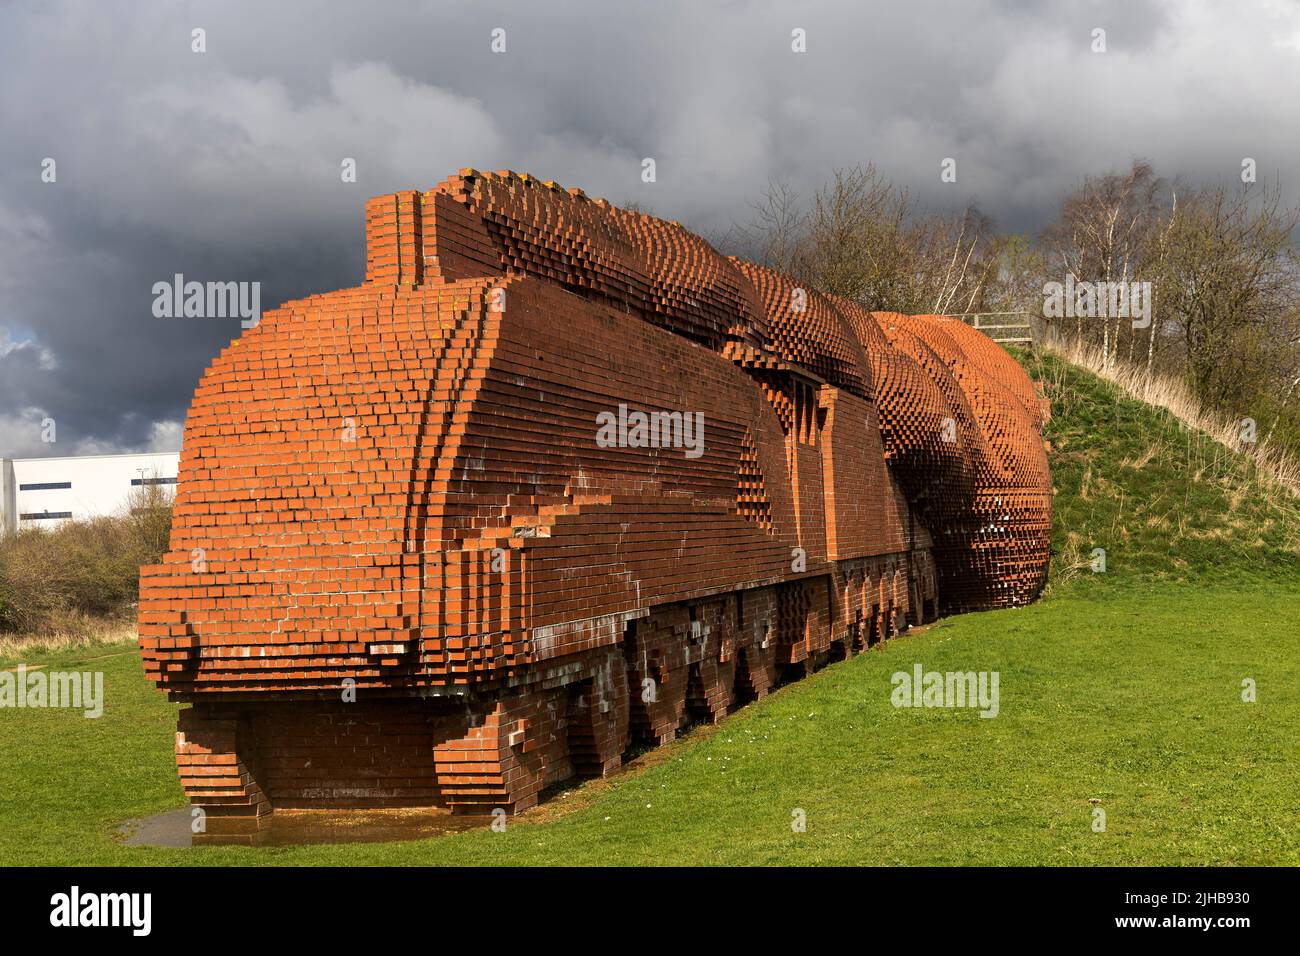 The Brick Train by David Mach is a brick sculpture located on the outskirts of the town of Darlington Stock Photo